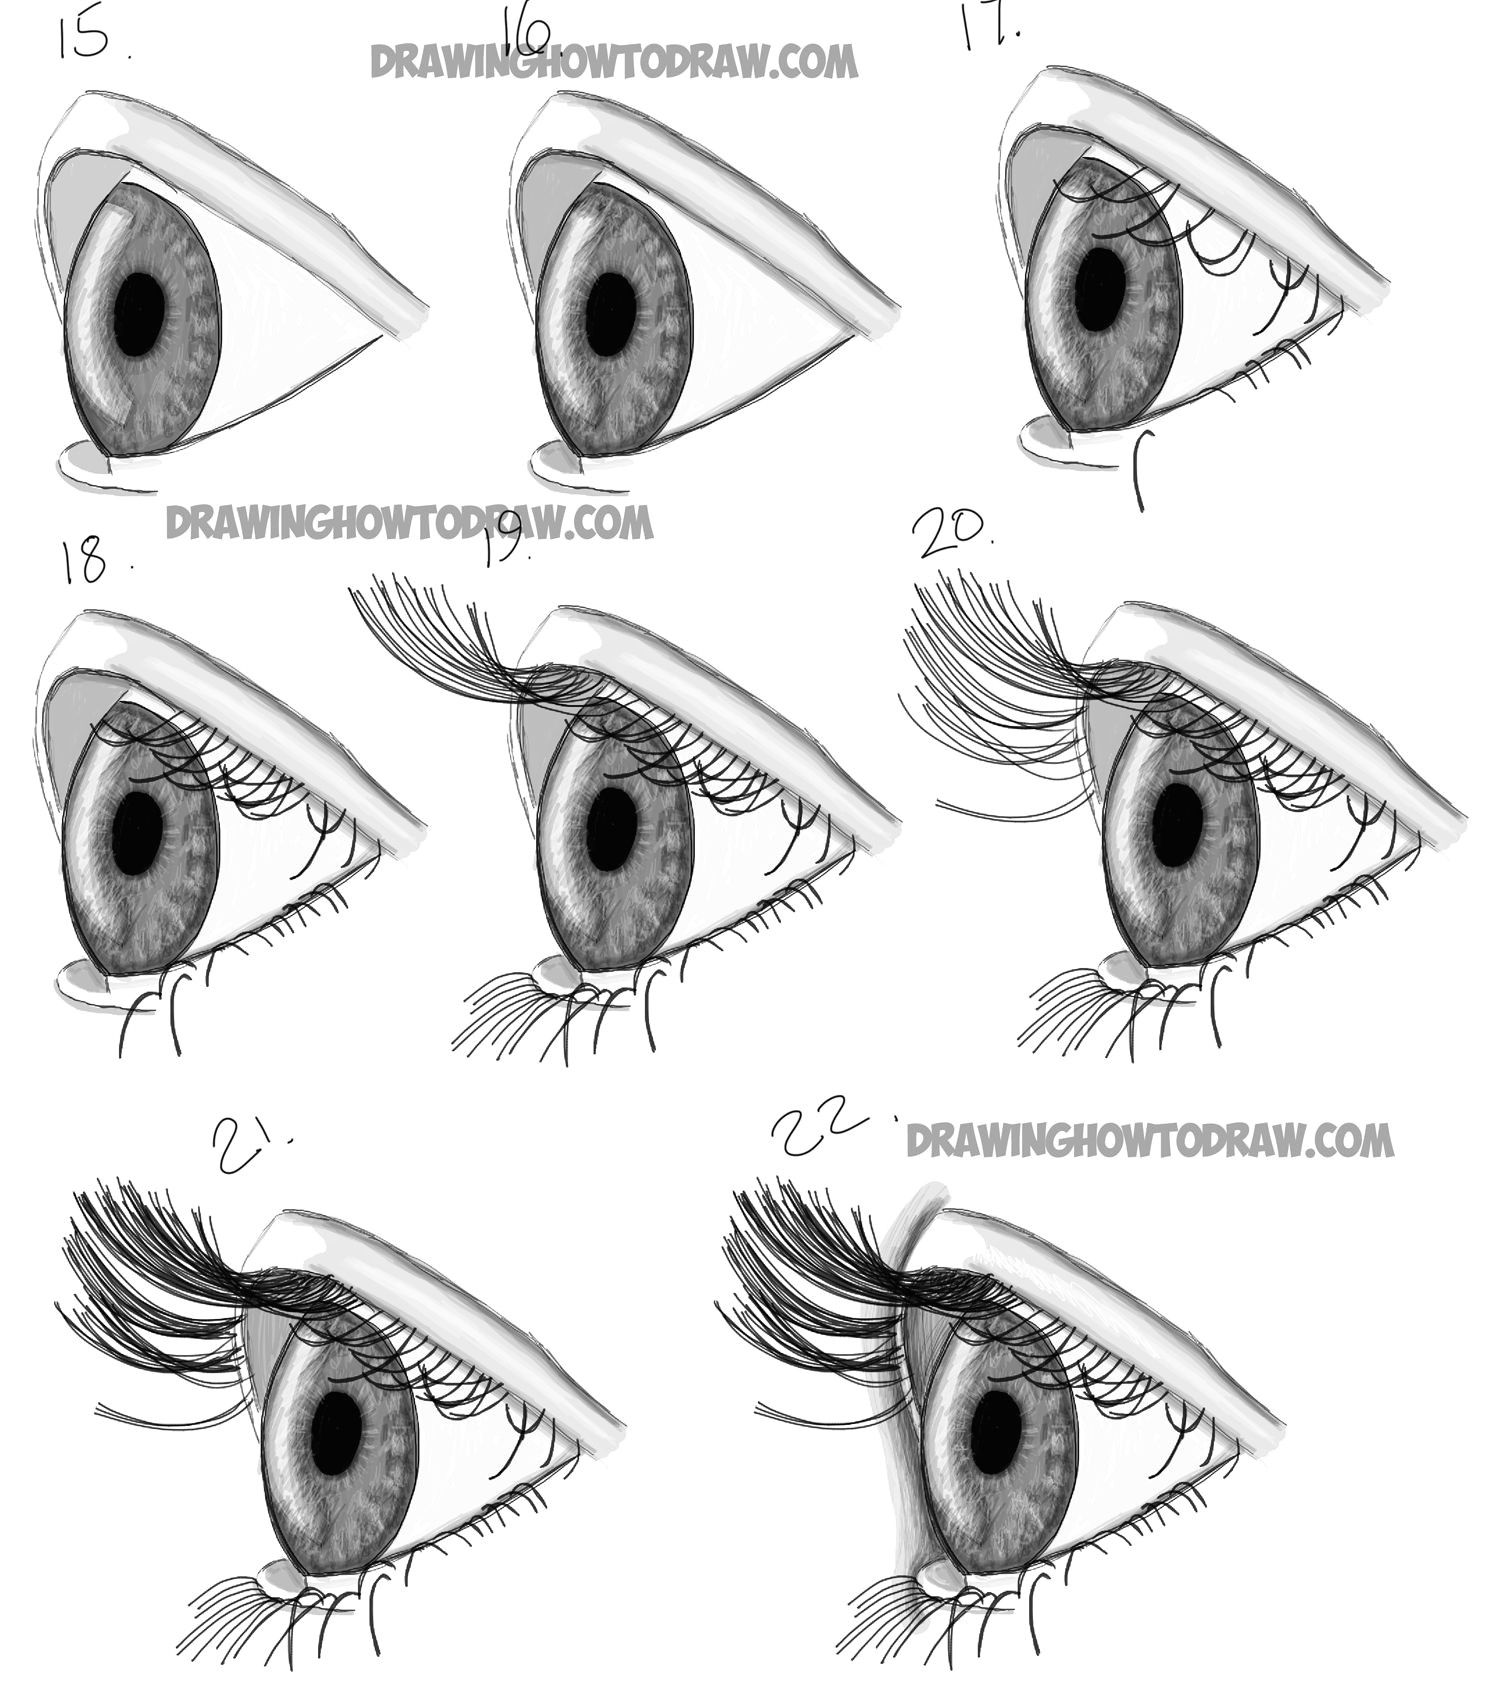 Steps for Drawing An Eye How to Draw Realistic Eyes From the Side Profile View Step by Step